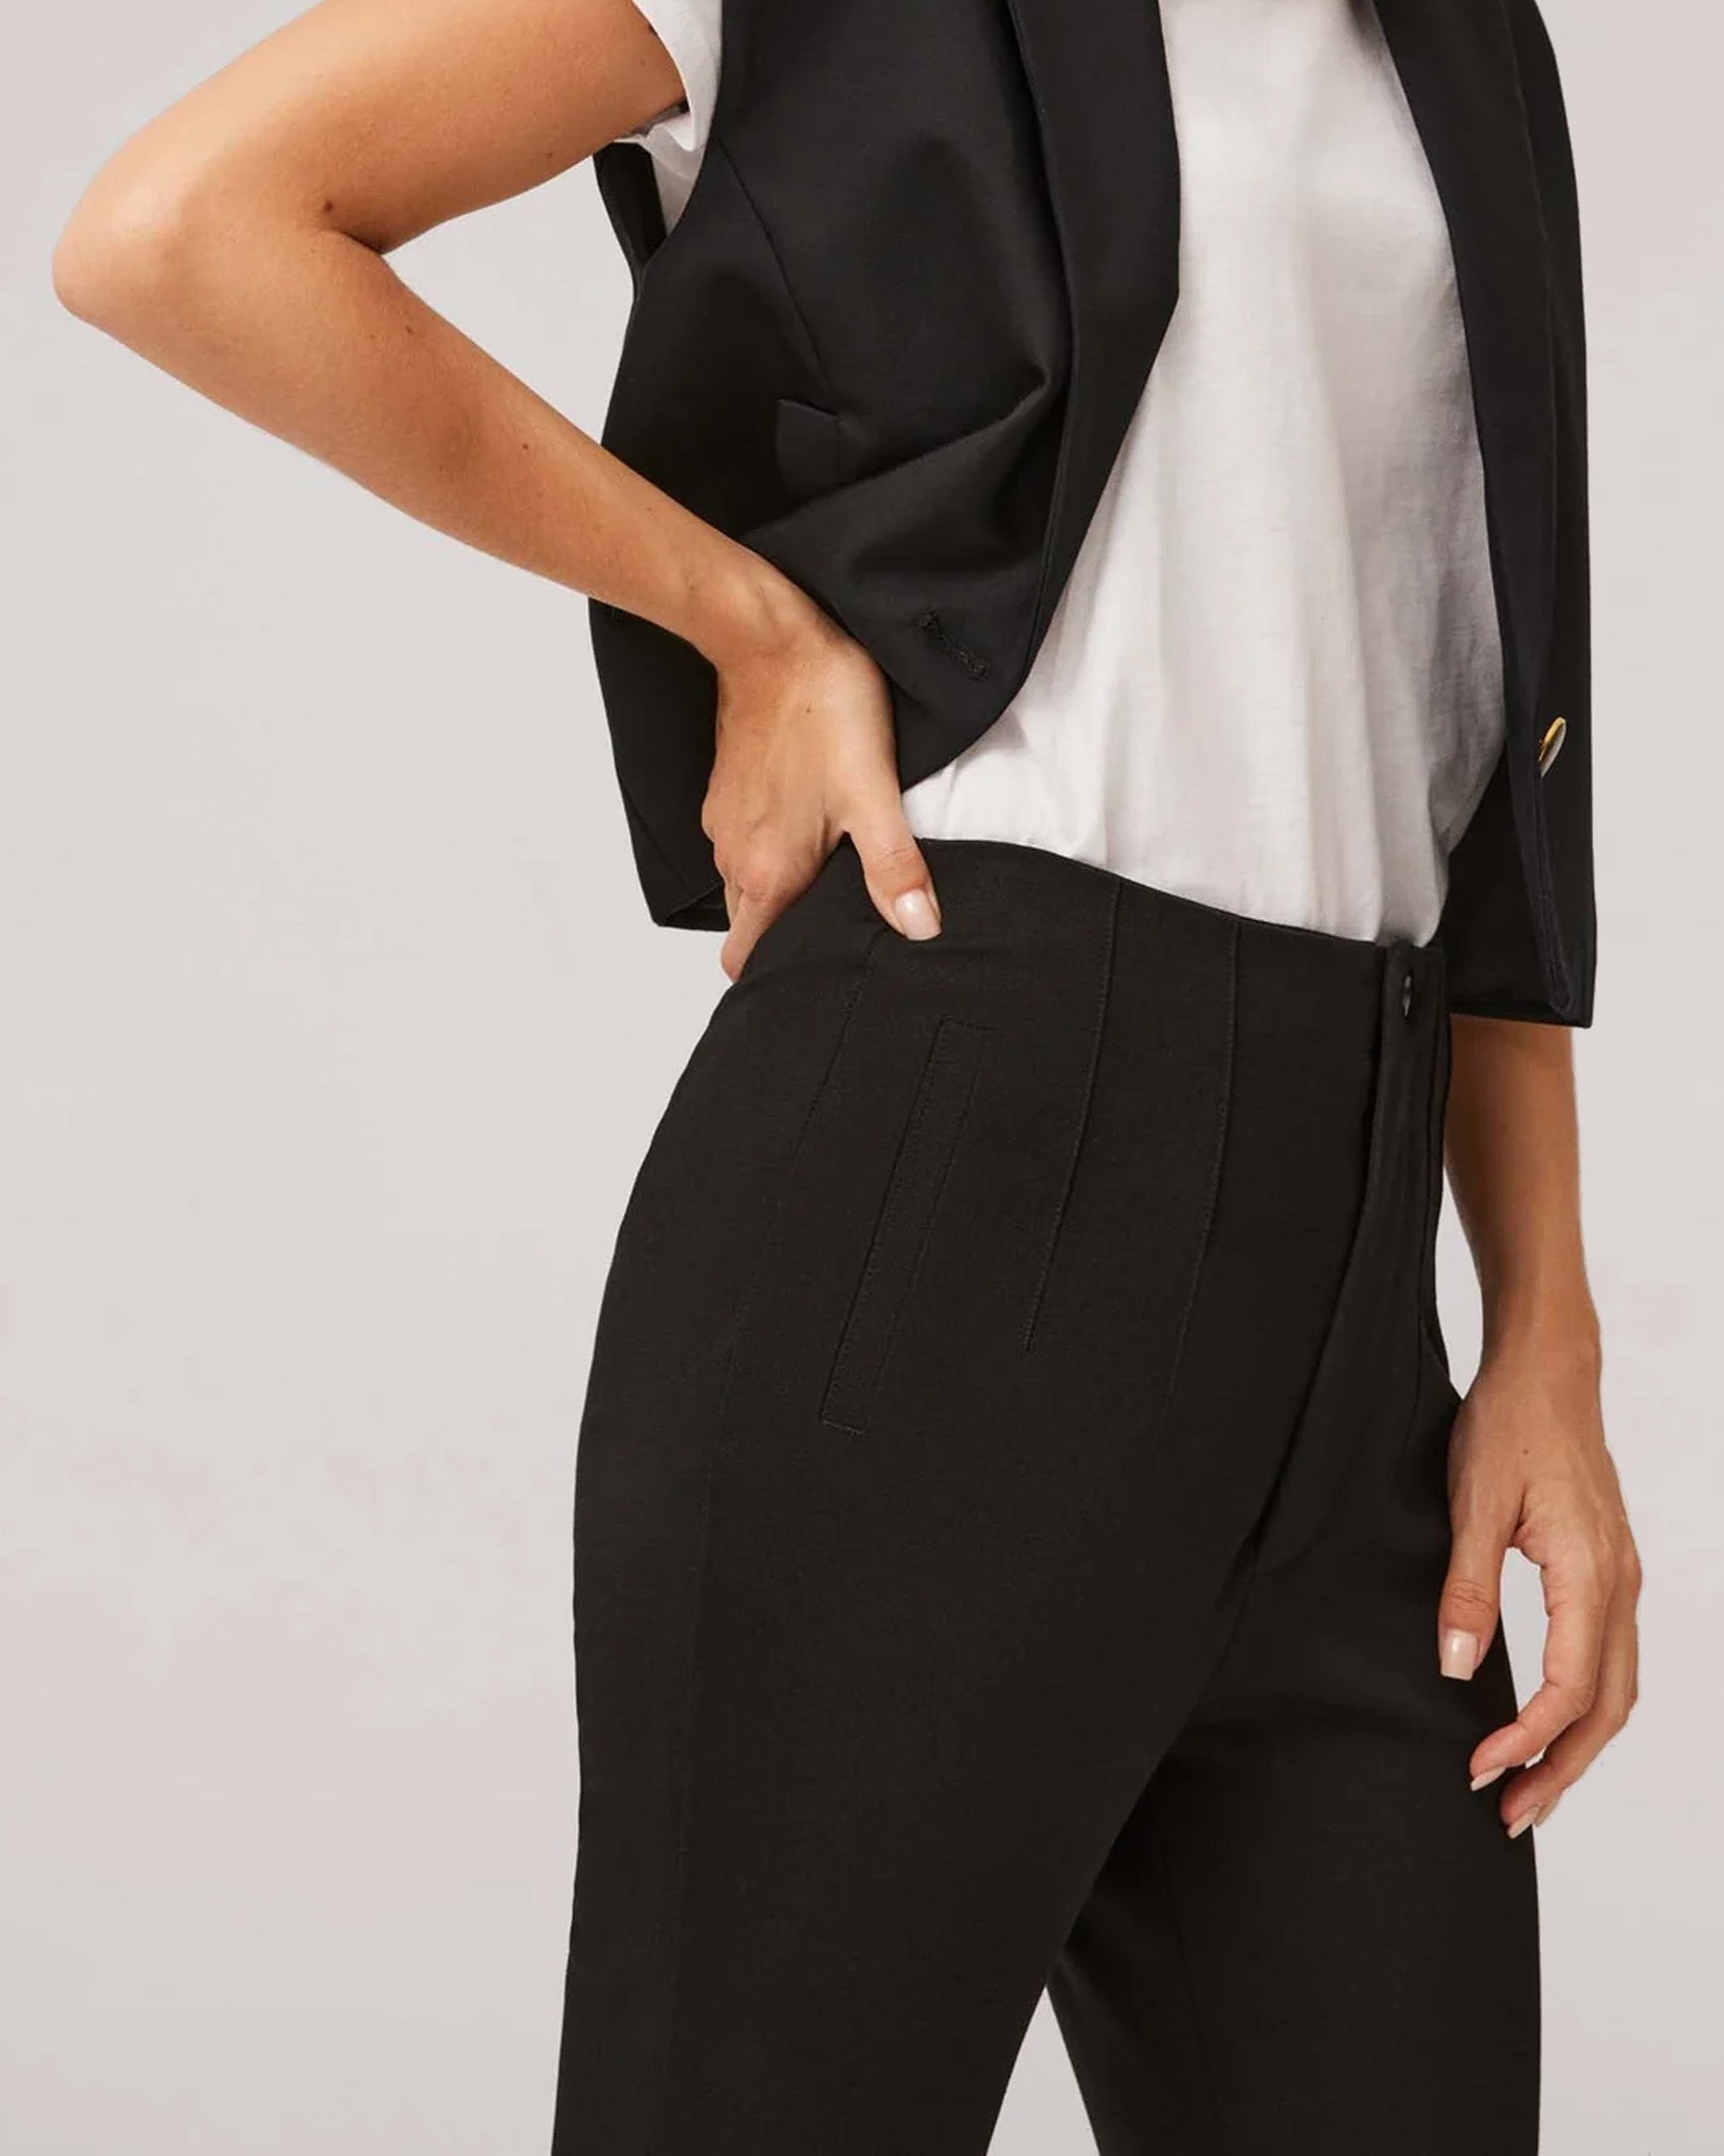 Ysabel Mora 70403 High Waist Trousers - Black suit style high waisted pants with pleated darts, invisible front zipper and button, worn with white t-shirt and waist coat.